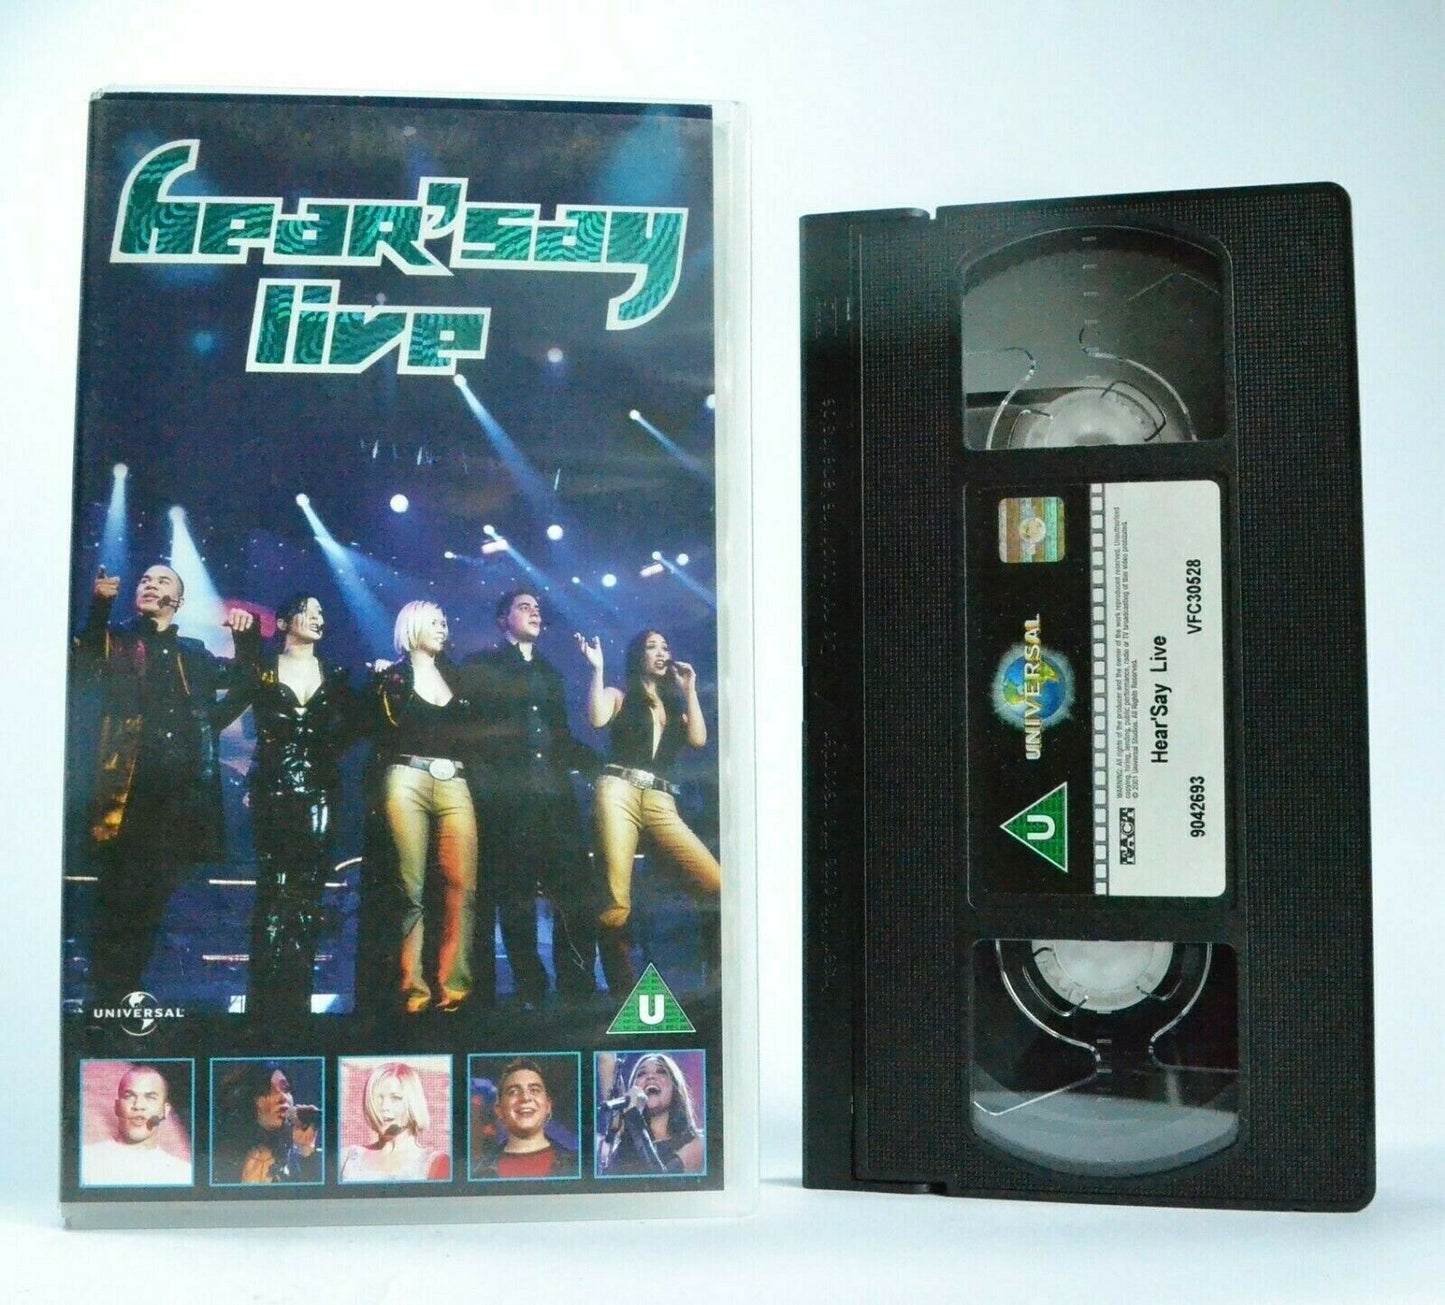 Hear'say: Live - Concert - Greatest Hits - Pop Music - Teen Group - Pal VHS-